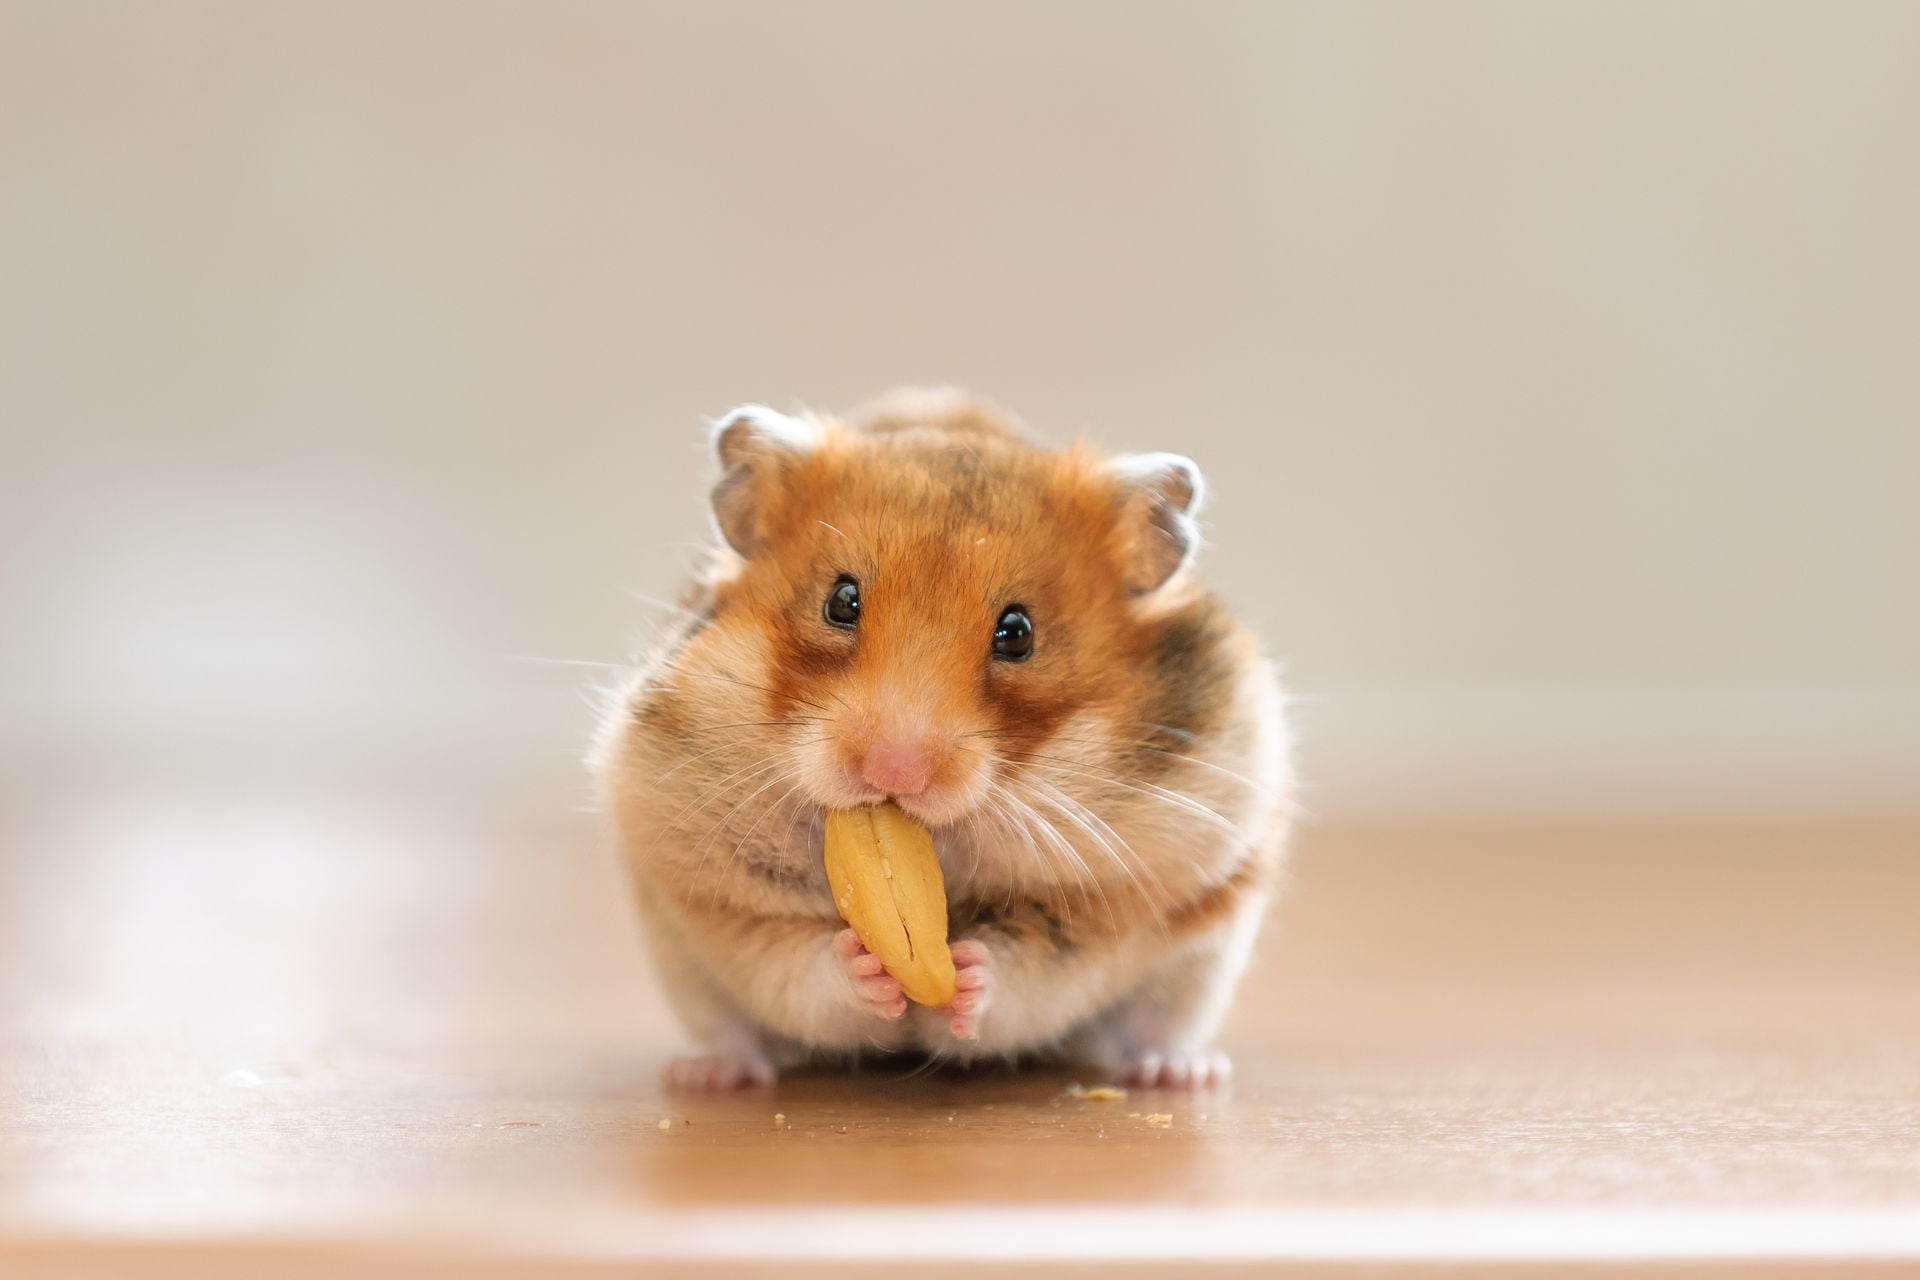 Full Guide to a Healthy and Nutritious Diet for Hamsters